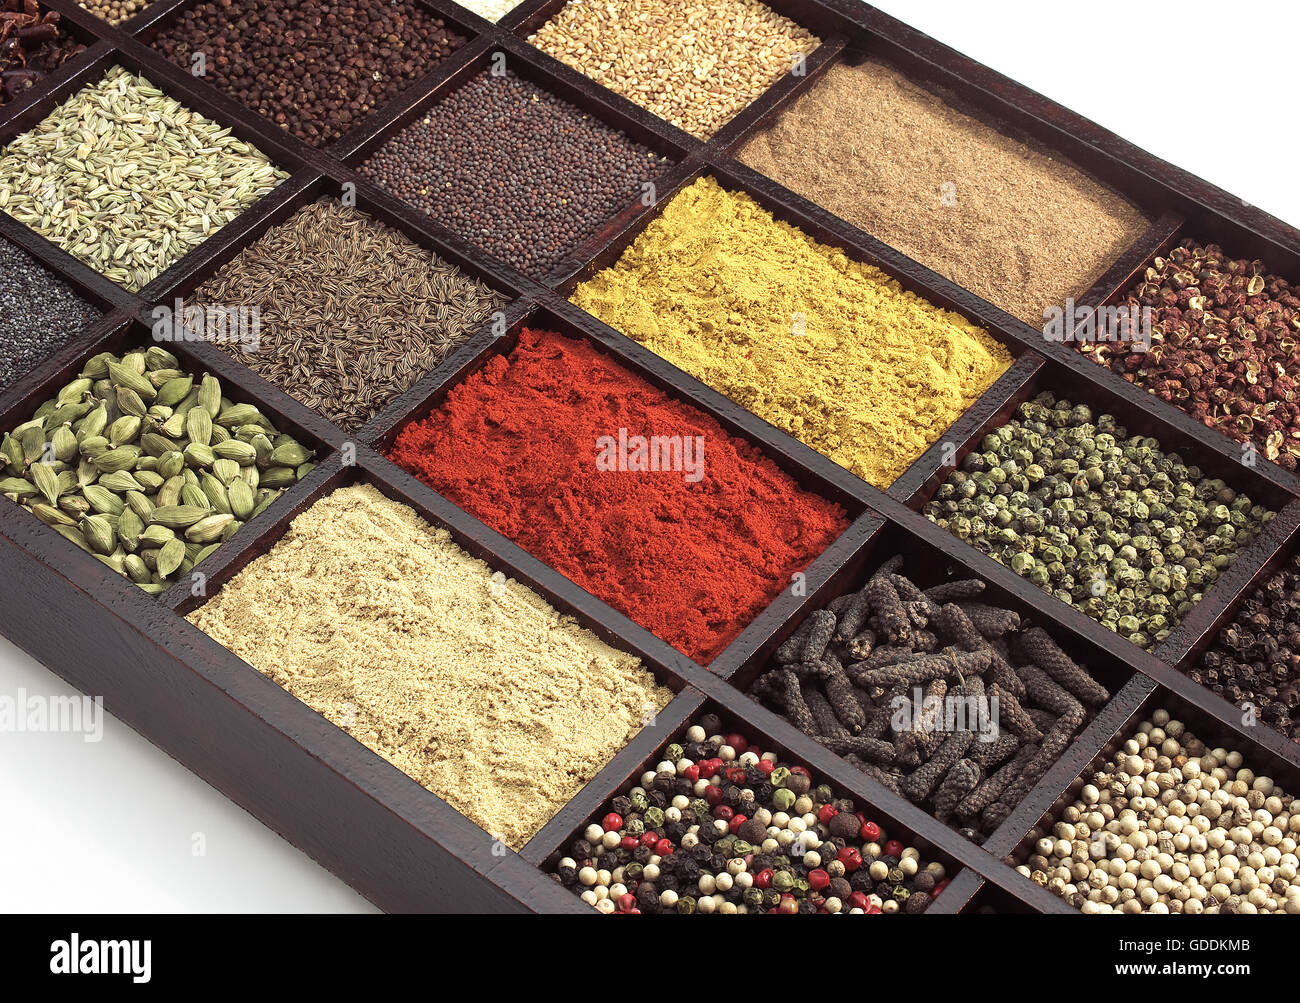 Box with many Spices Stock Photo